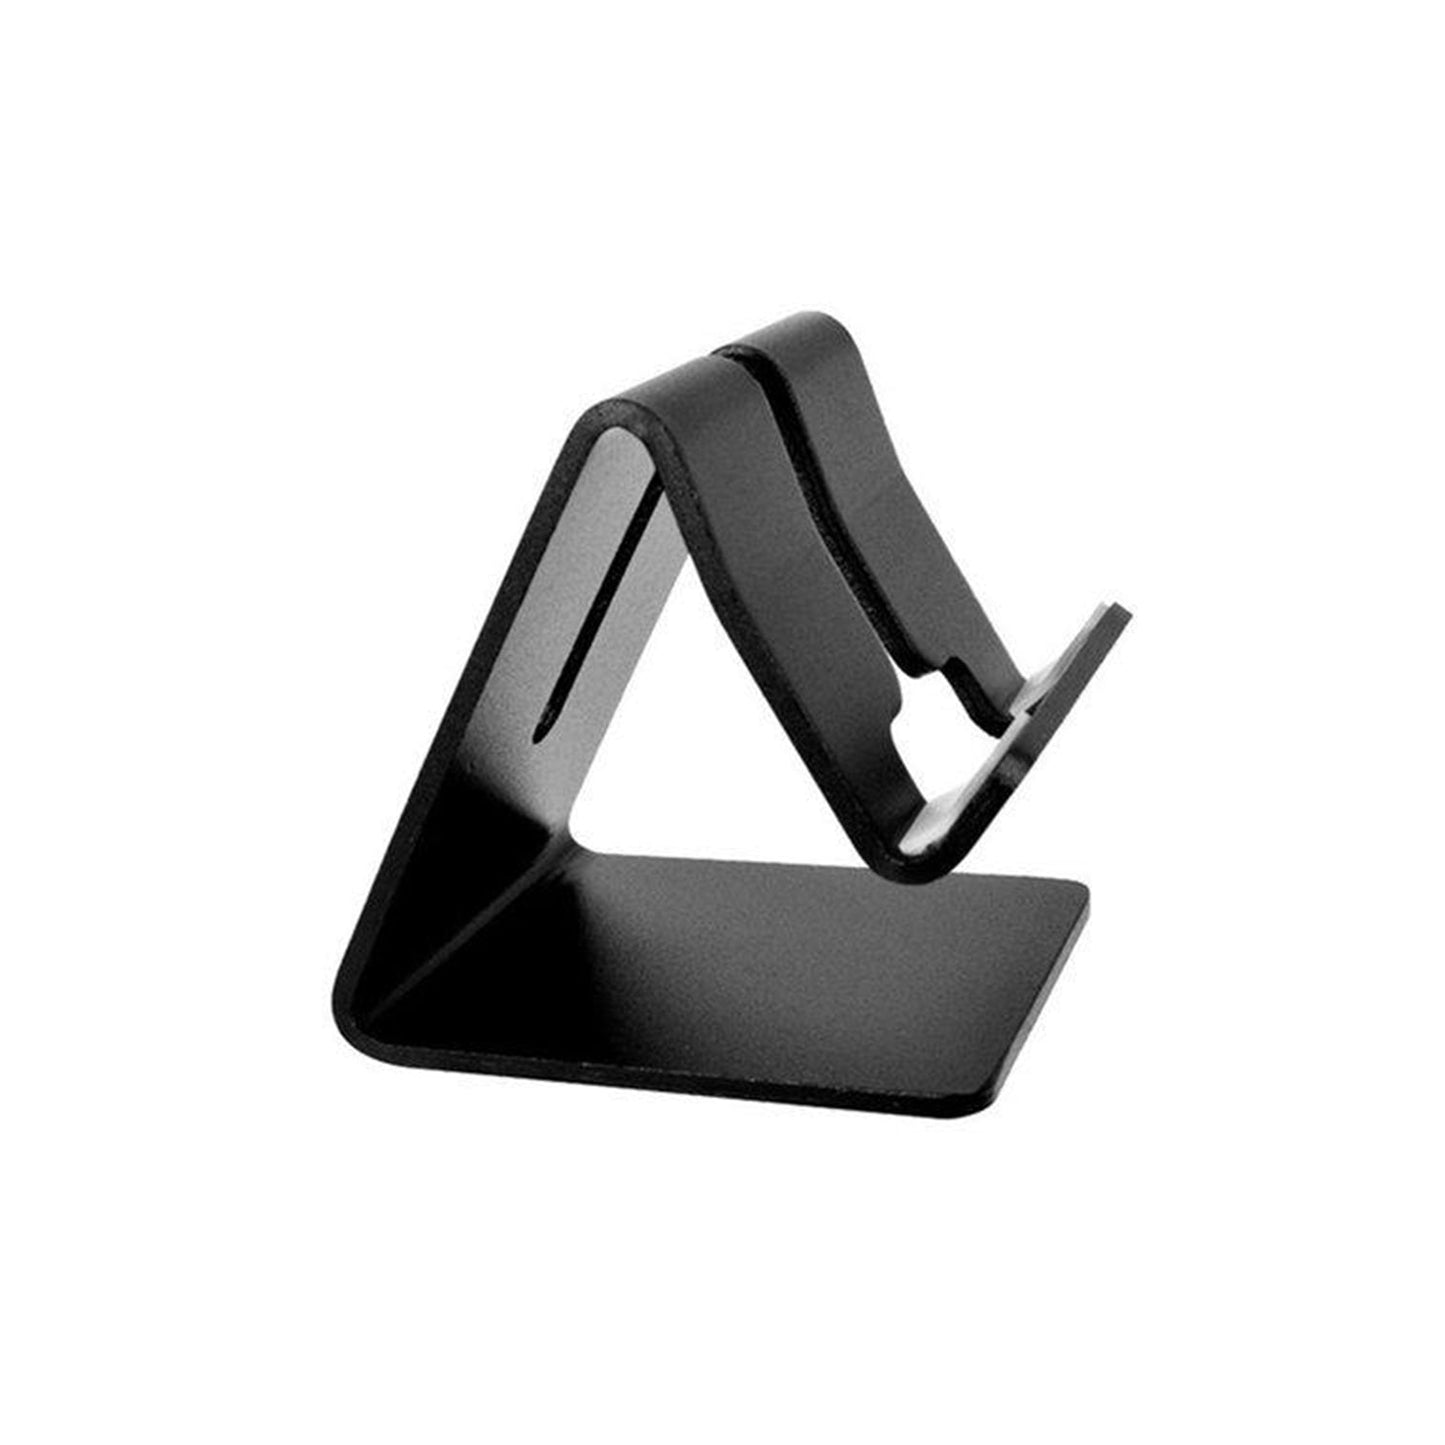 6149 Mobile Metal Stand widely used to give a stand and support for smartphones etc, at any place and any time purposes.